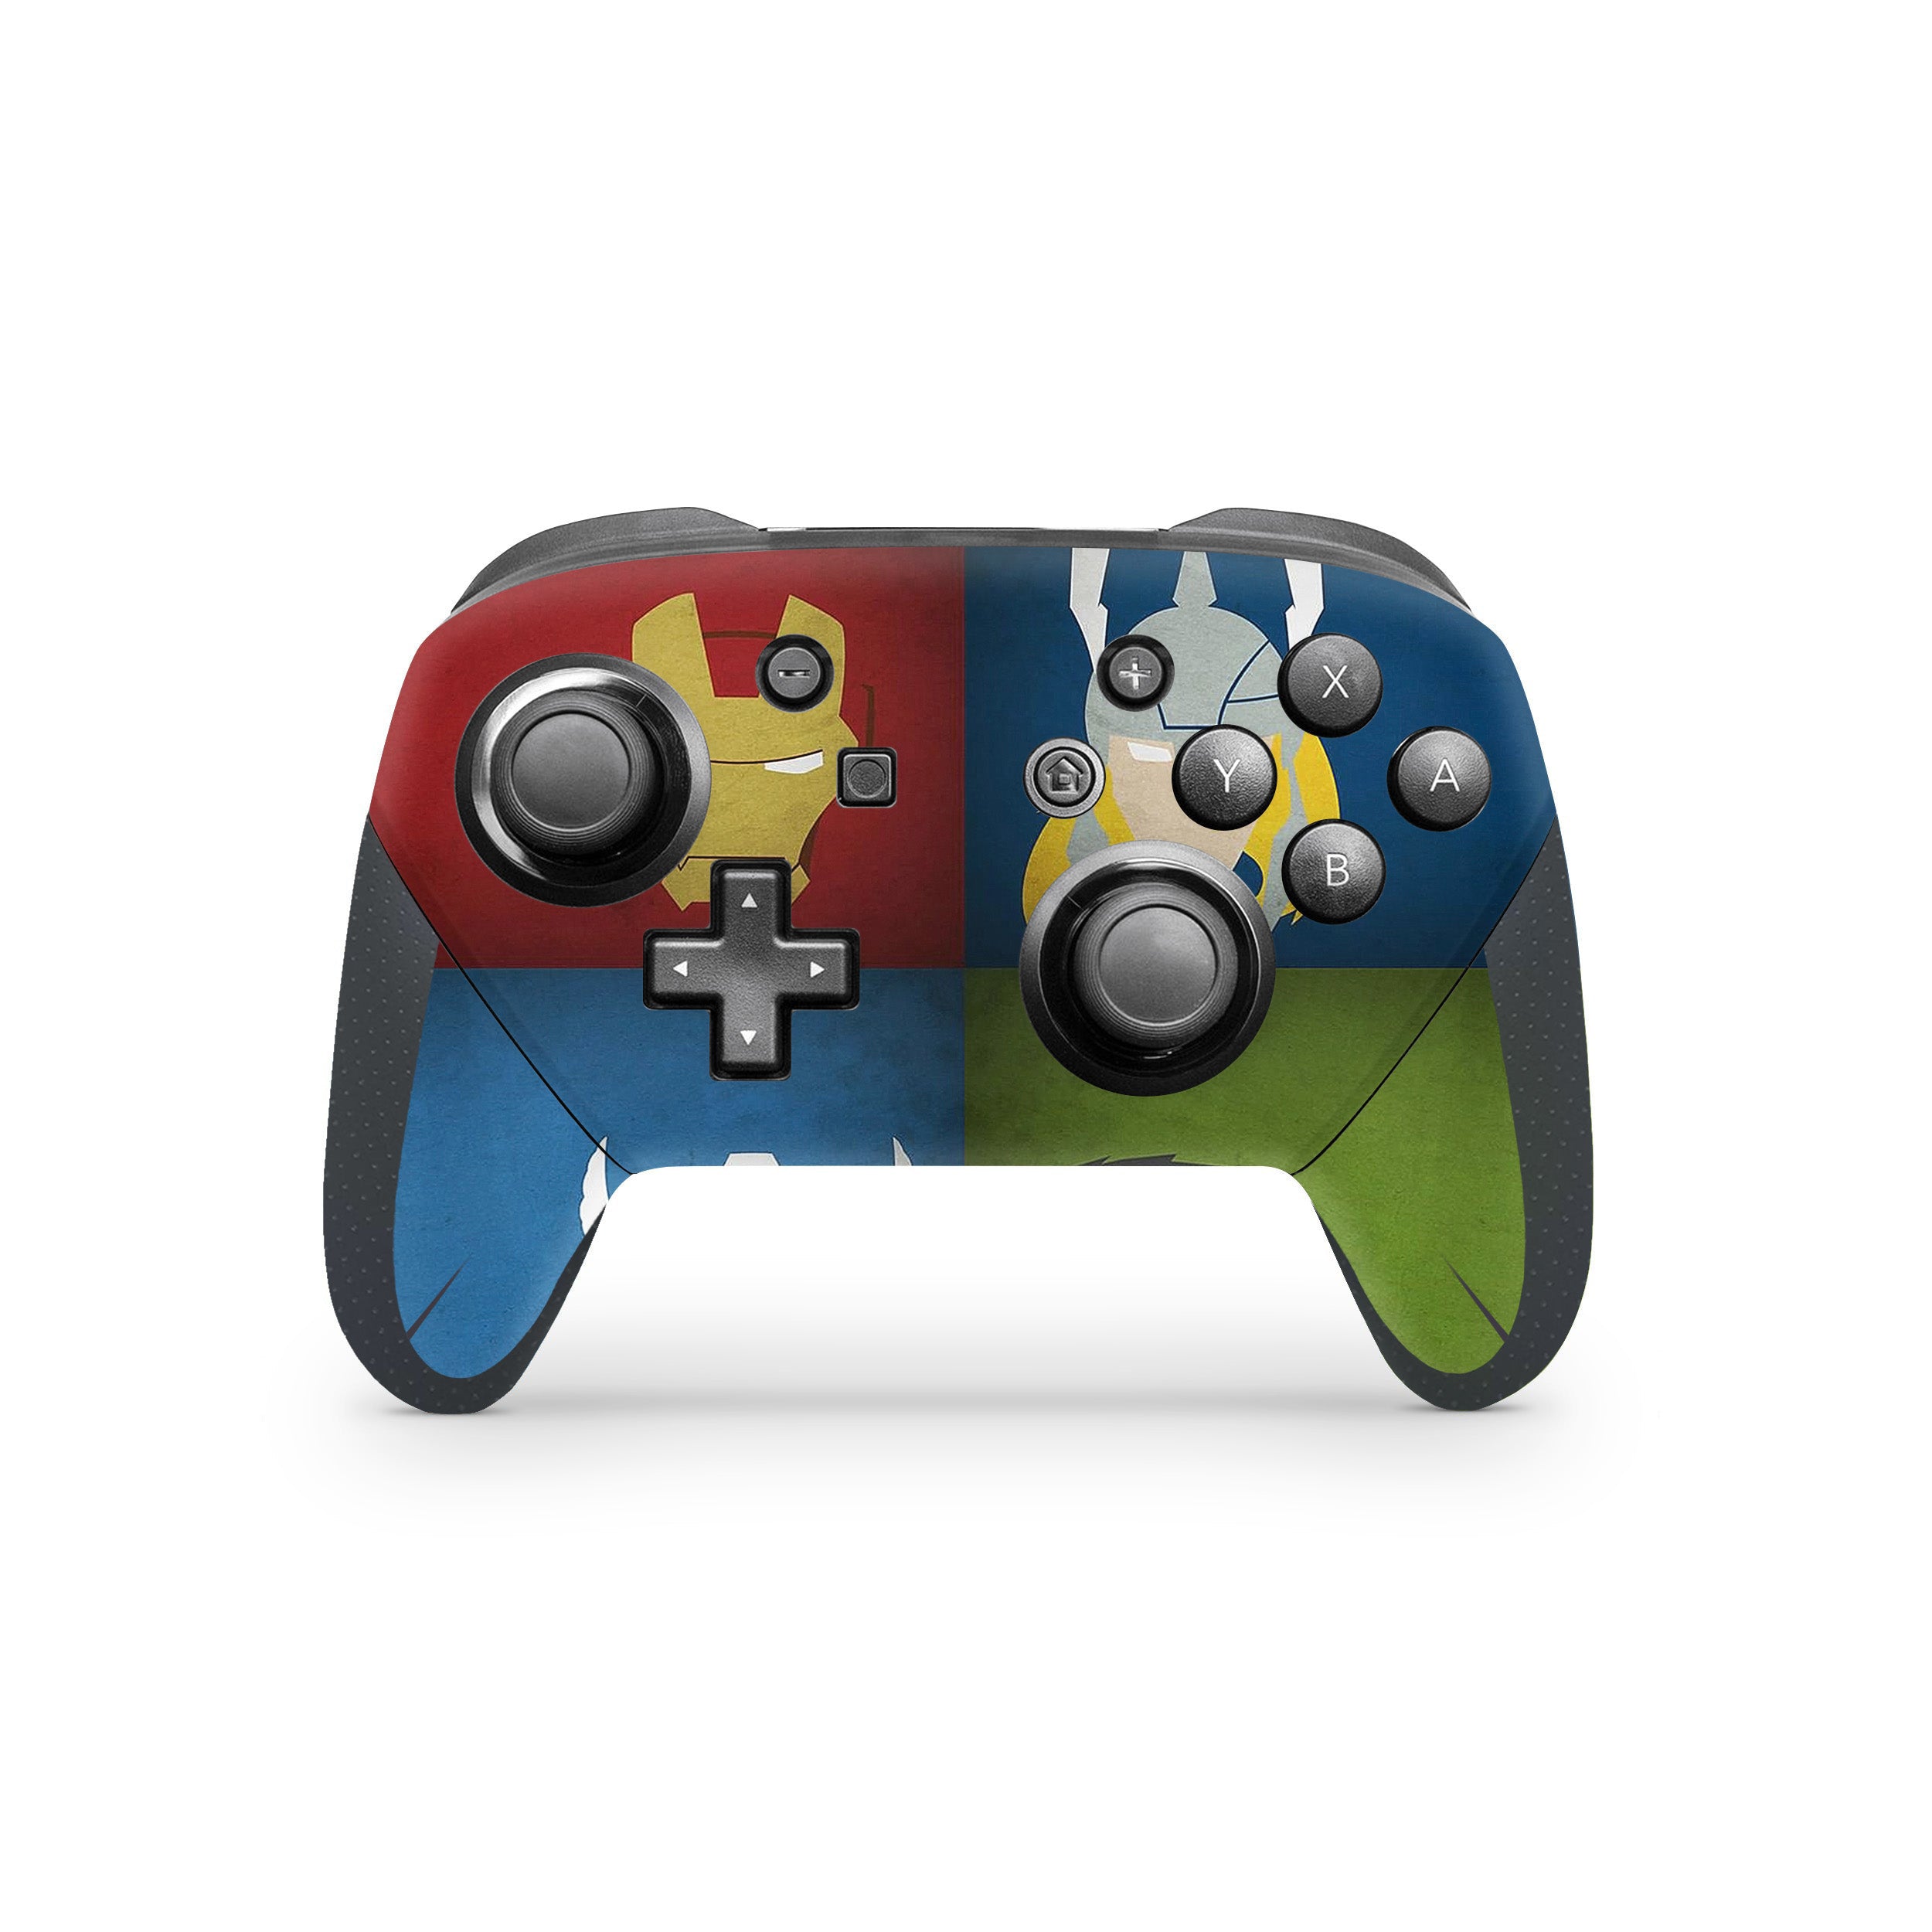 A video game skin featuring a Marvel Avengers design for the Switch Pro Controller.